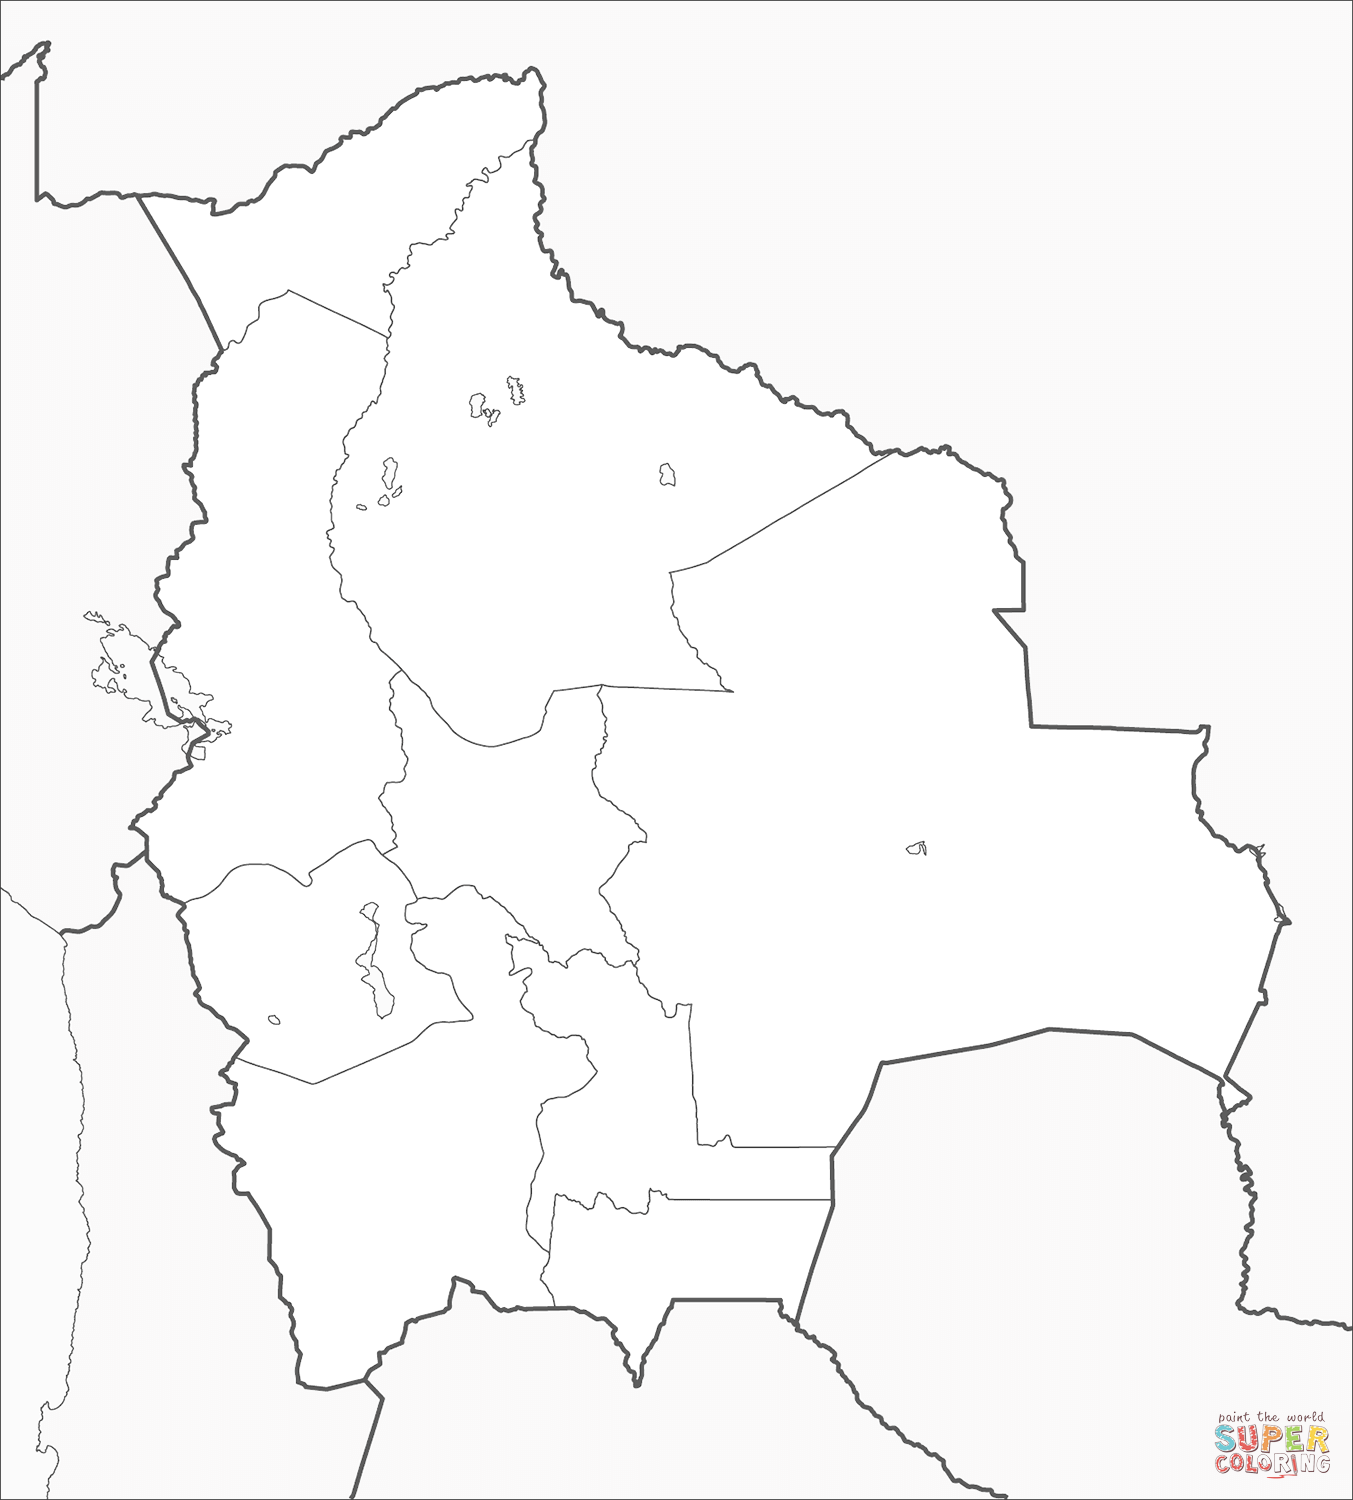 Bolivia Map coloring page | Free Printable Coloring Pages